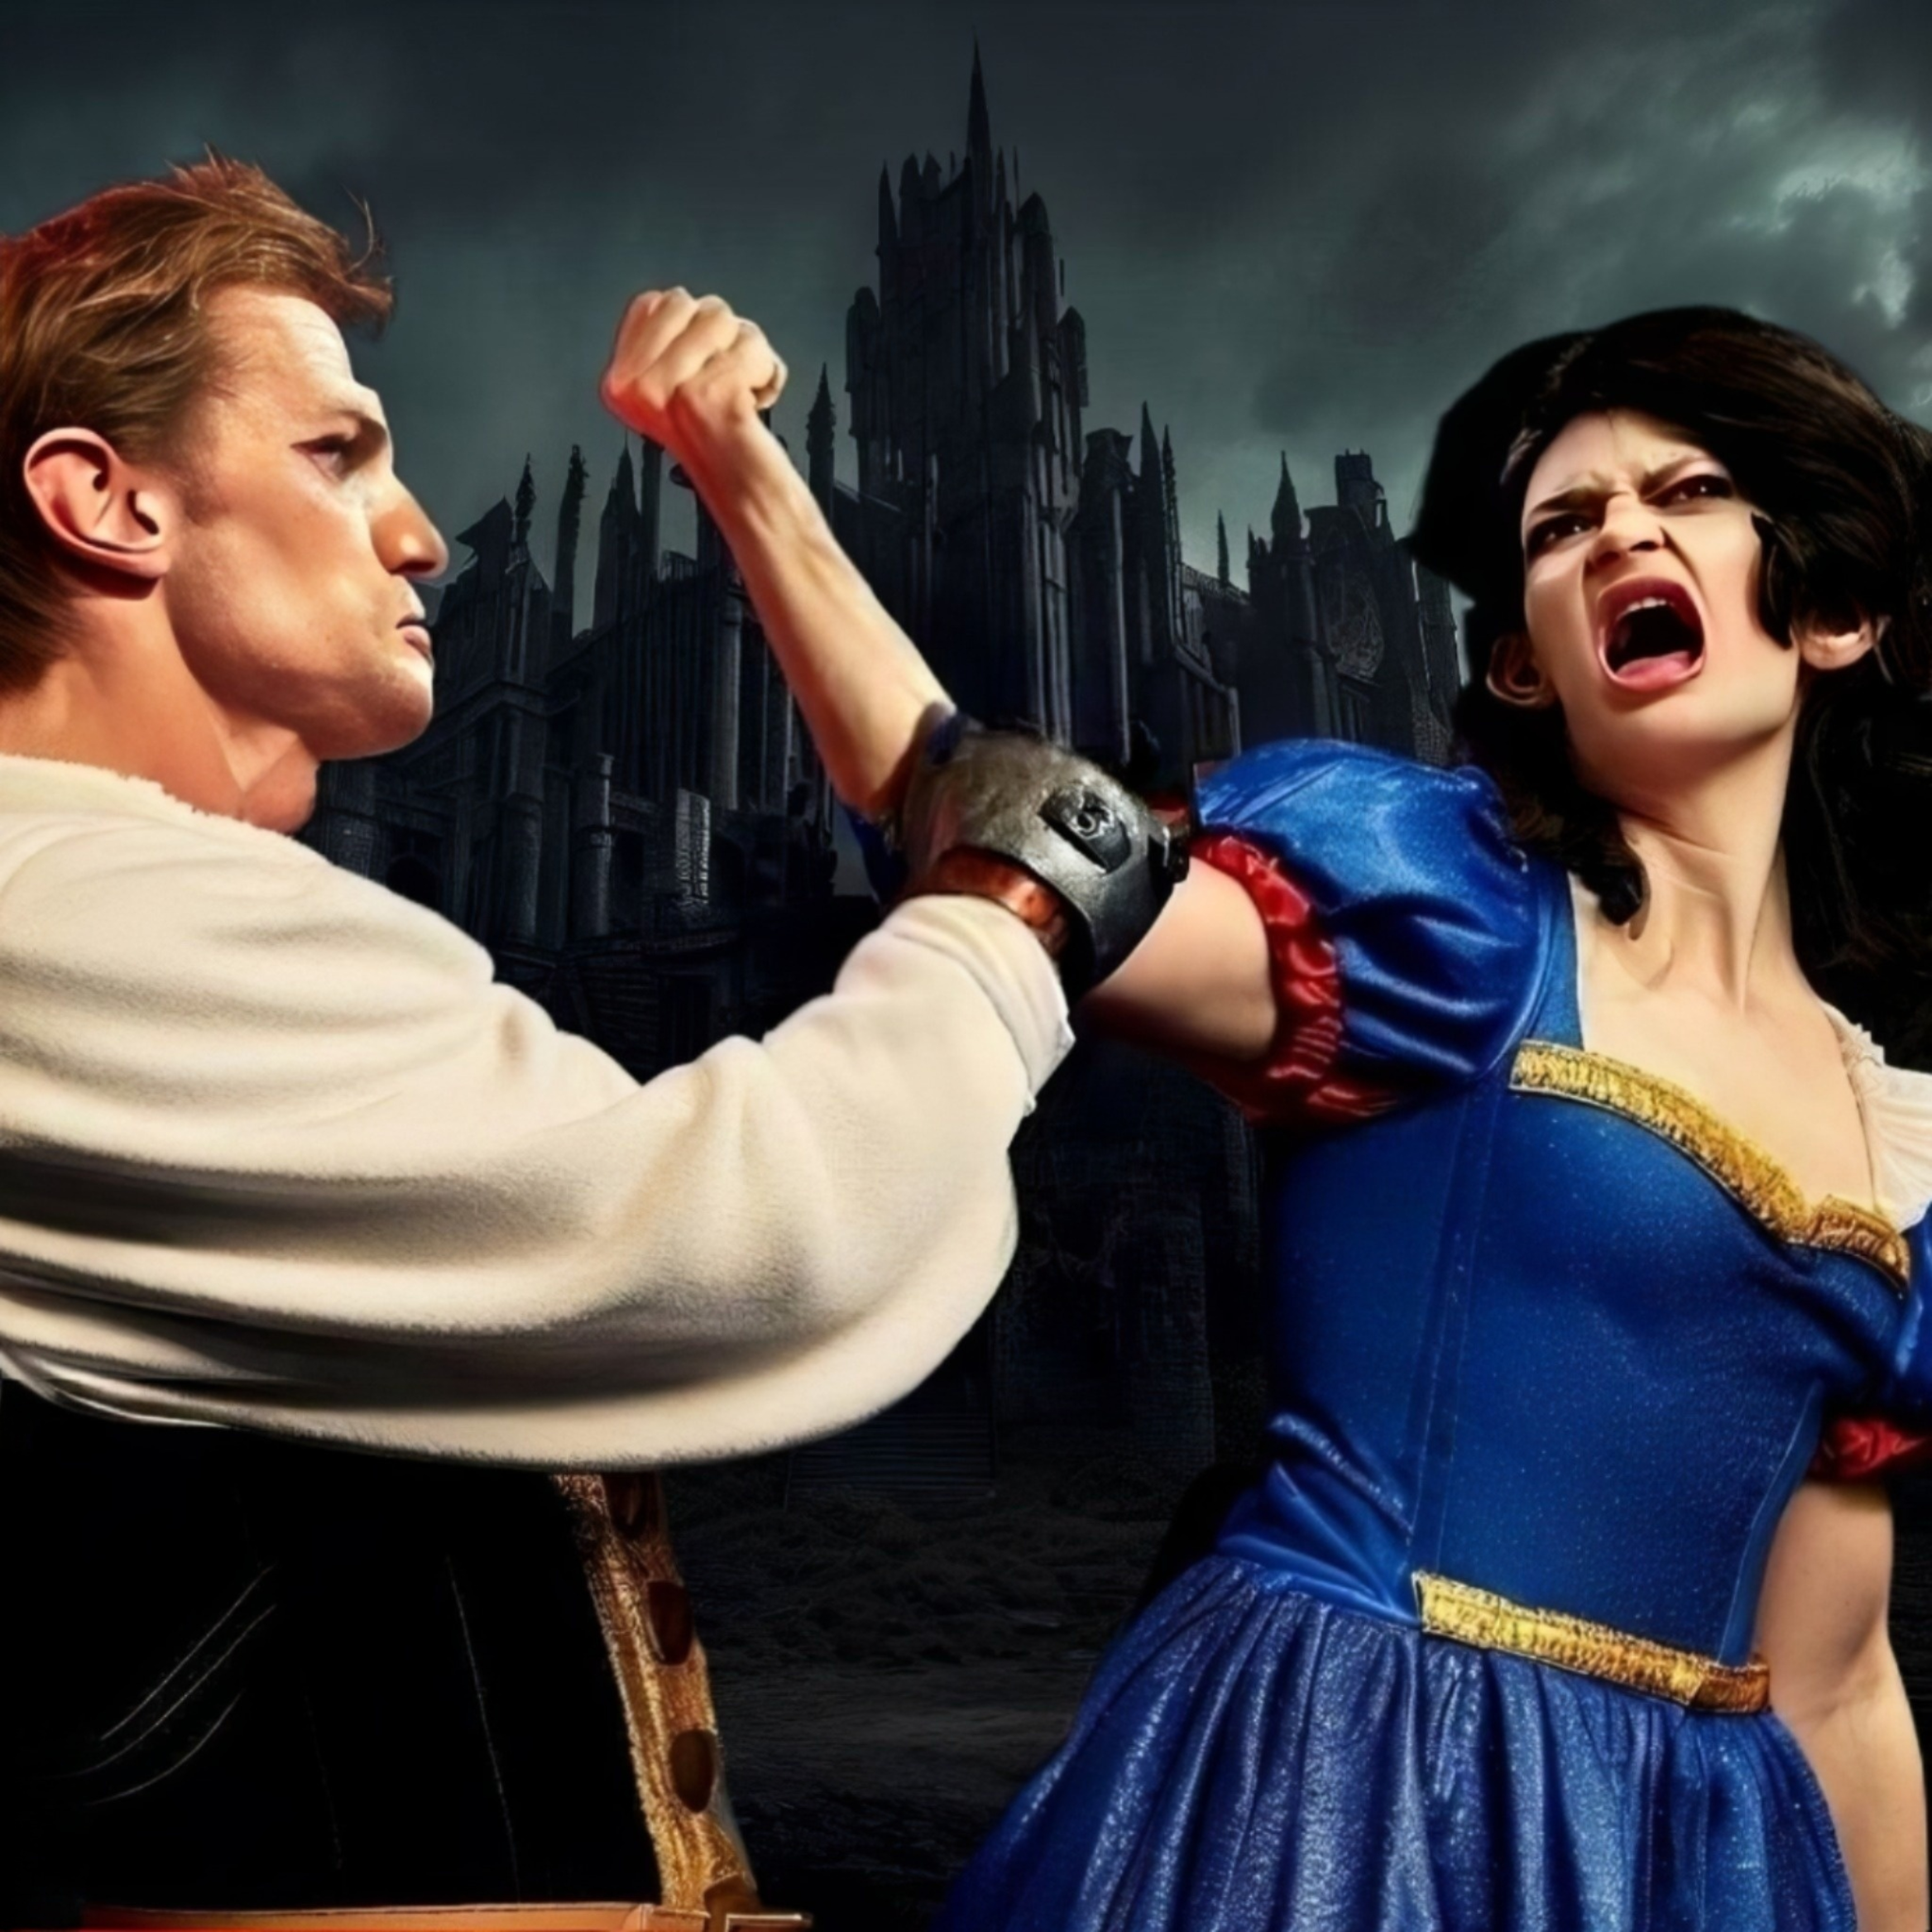 Prince Charming grabbing Snow White's arm with a medieval glove on his hand.